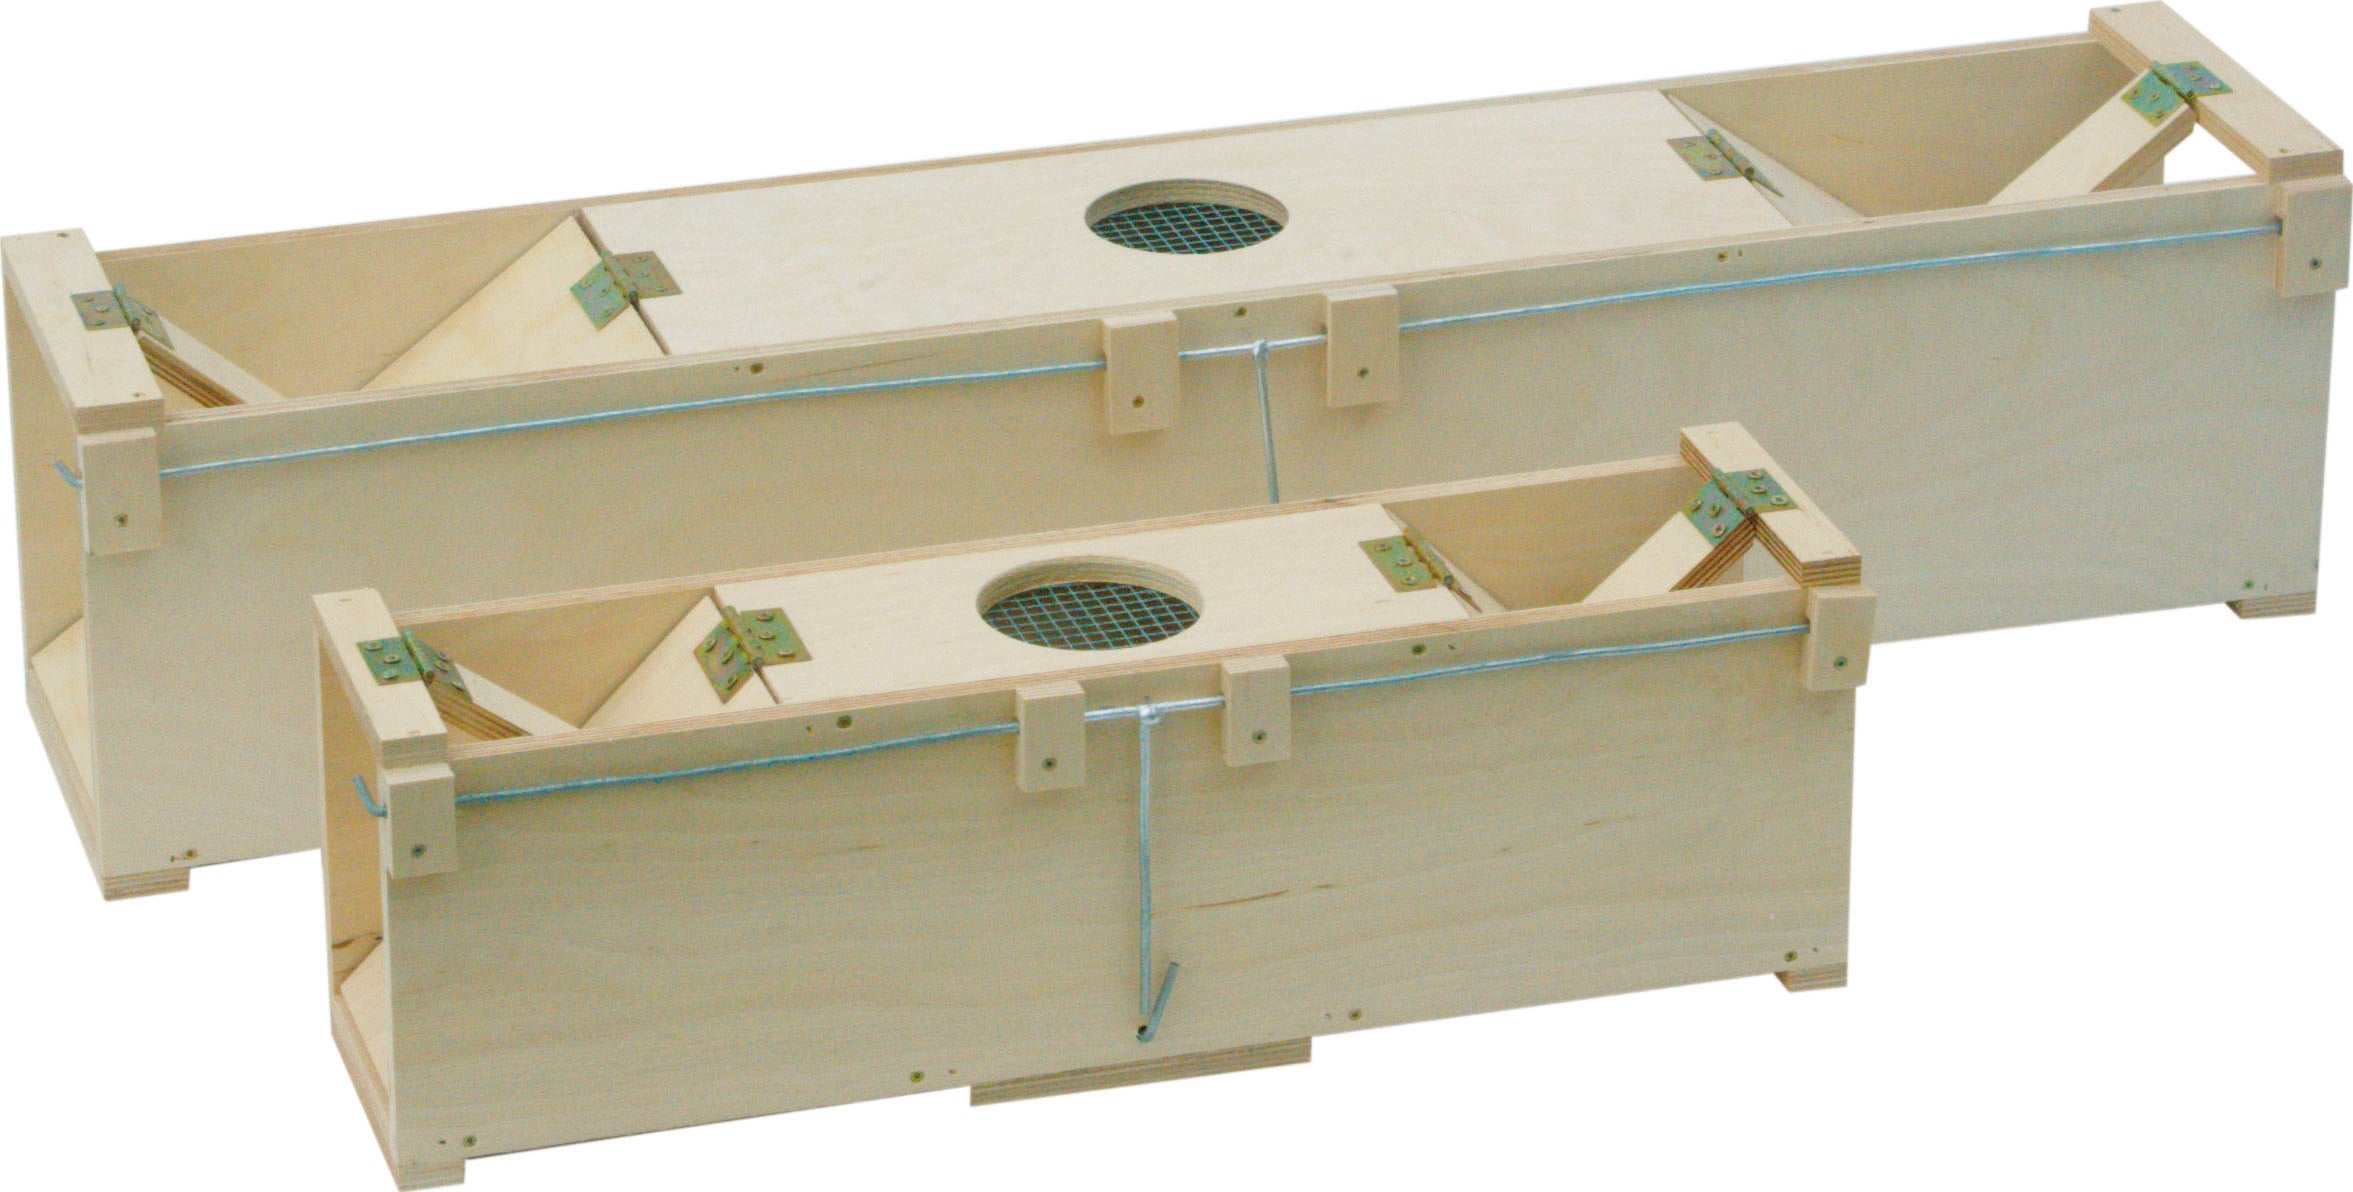 Rat-Trap, 60x12x16cm - also for catching Ermine and Weasel